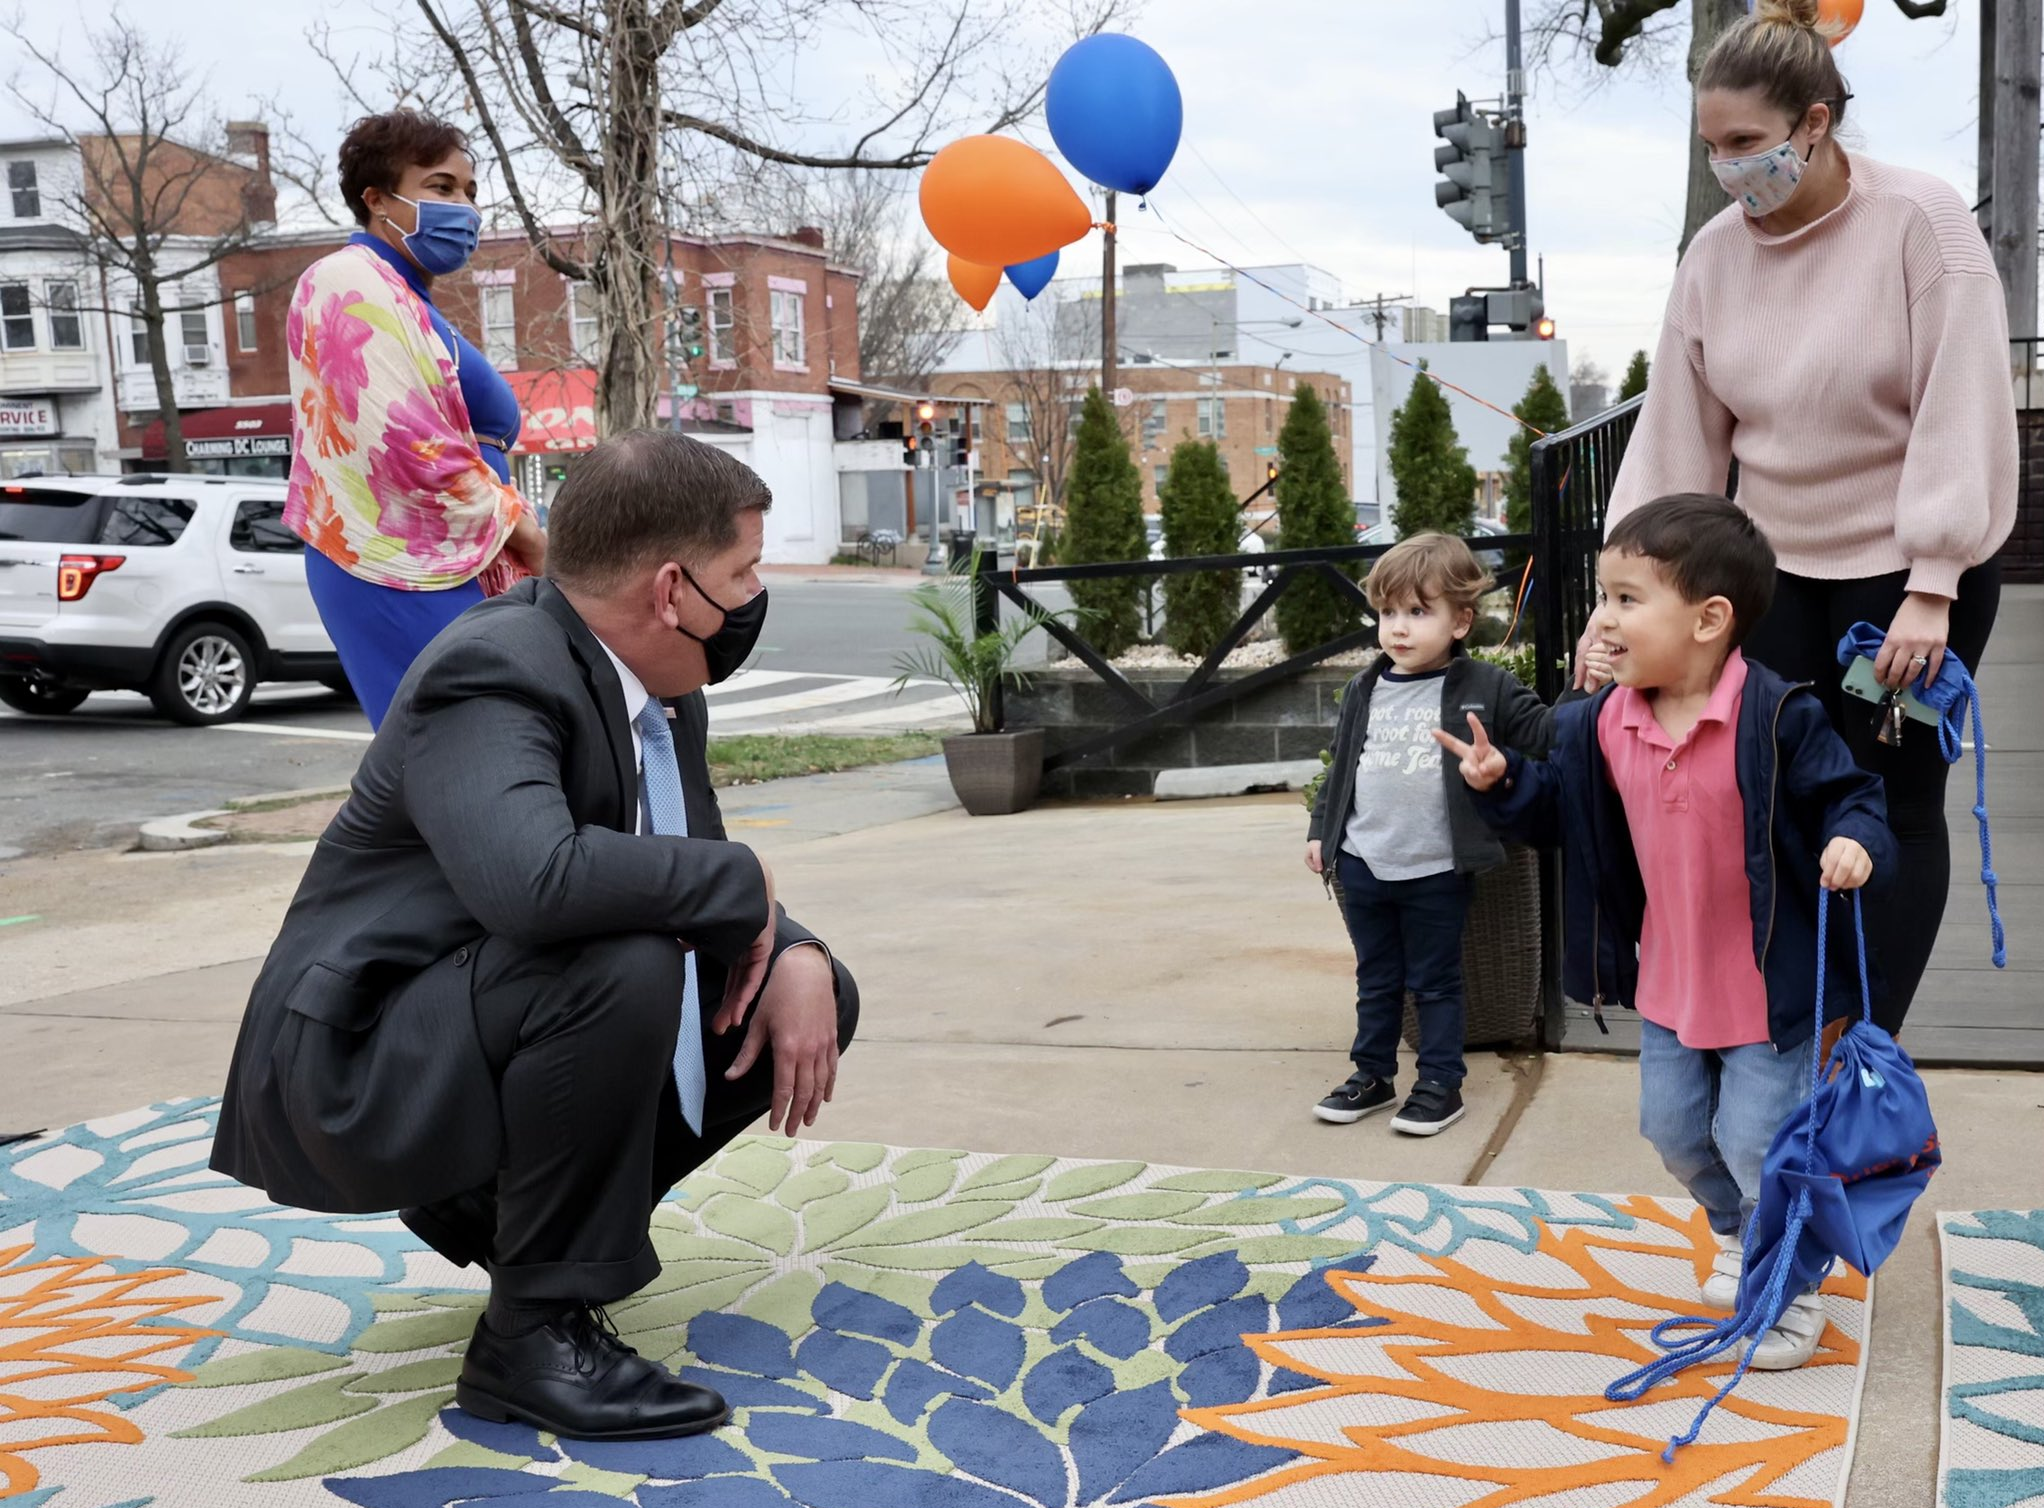 Secretary Walsh meets children, parents and staff at the Bright Start Early Care and Preschool in Washington, D.C.